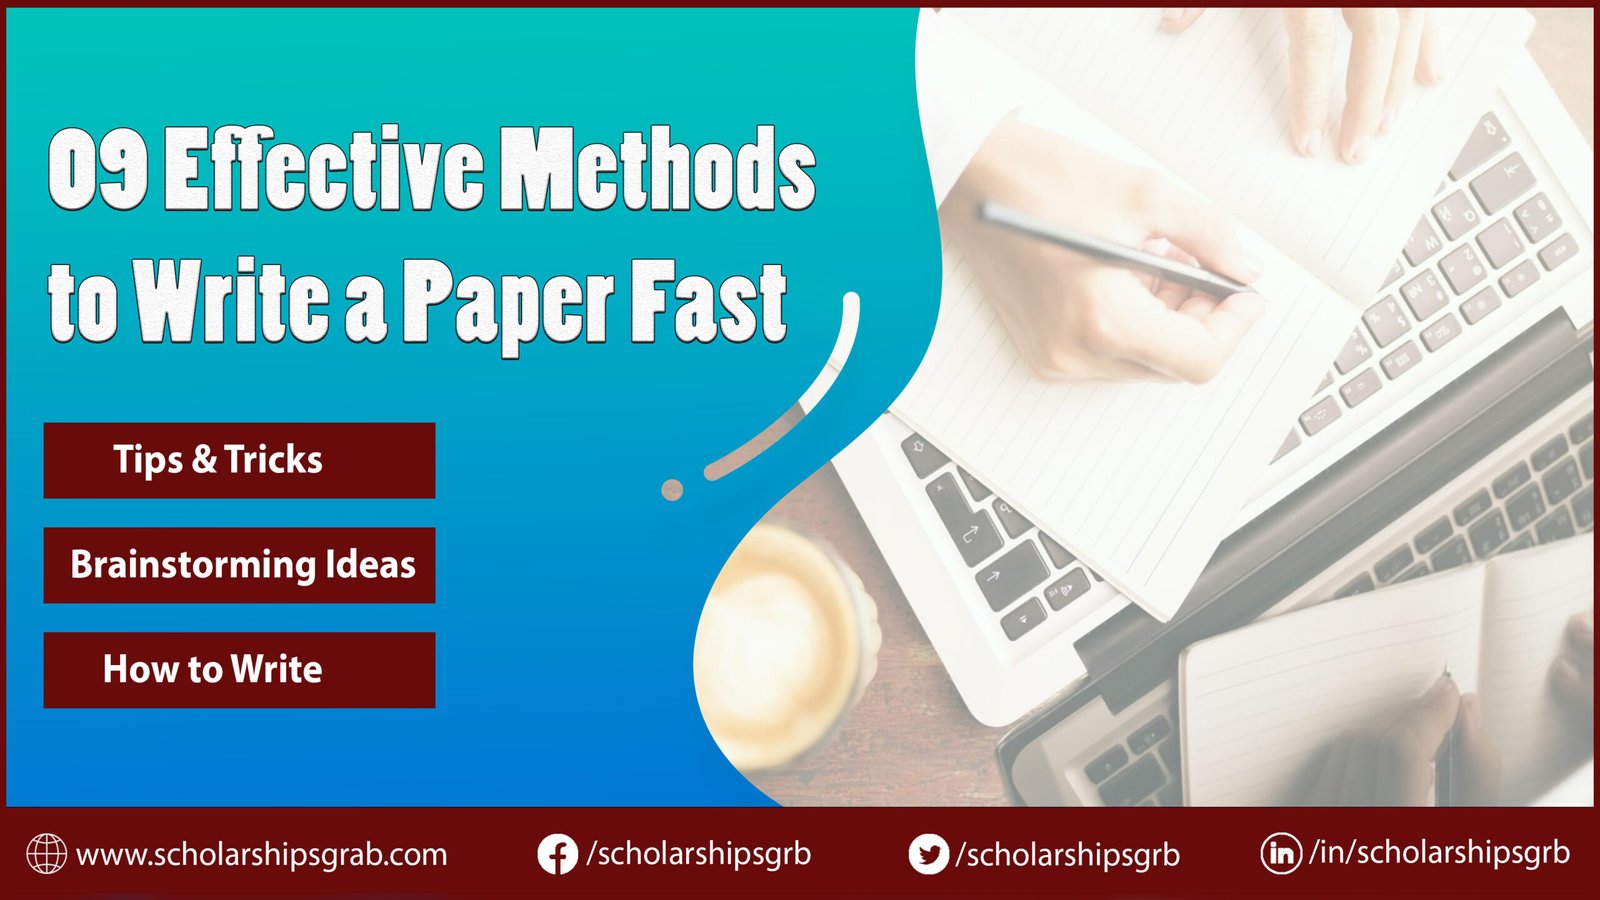 Effective Methods to Write a Paper Fast